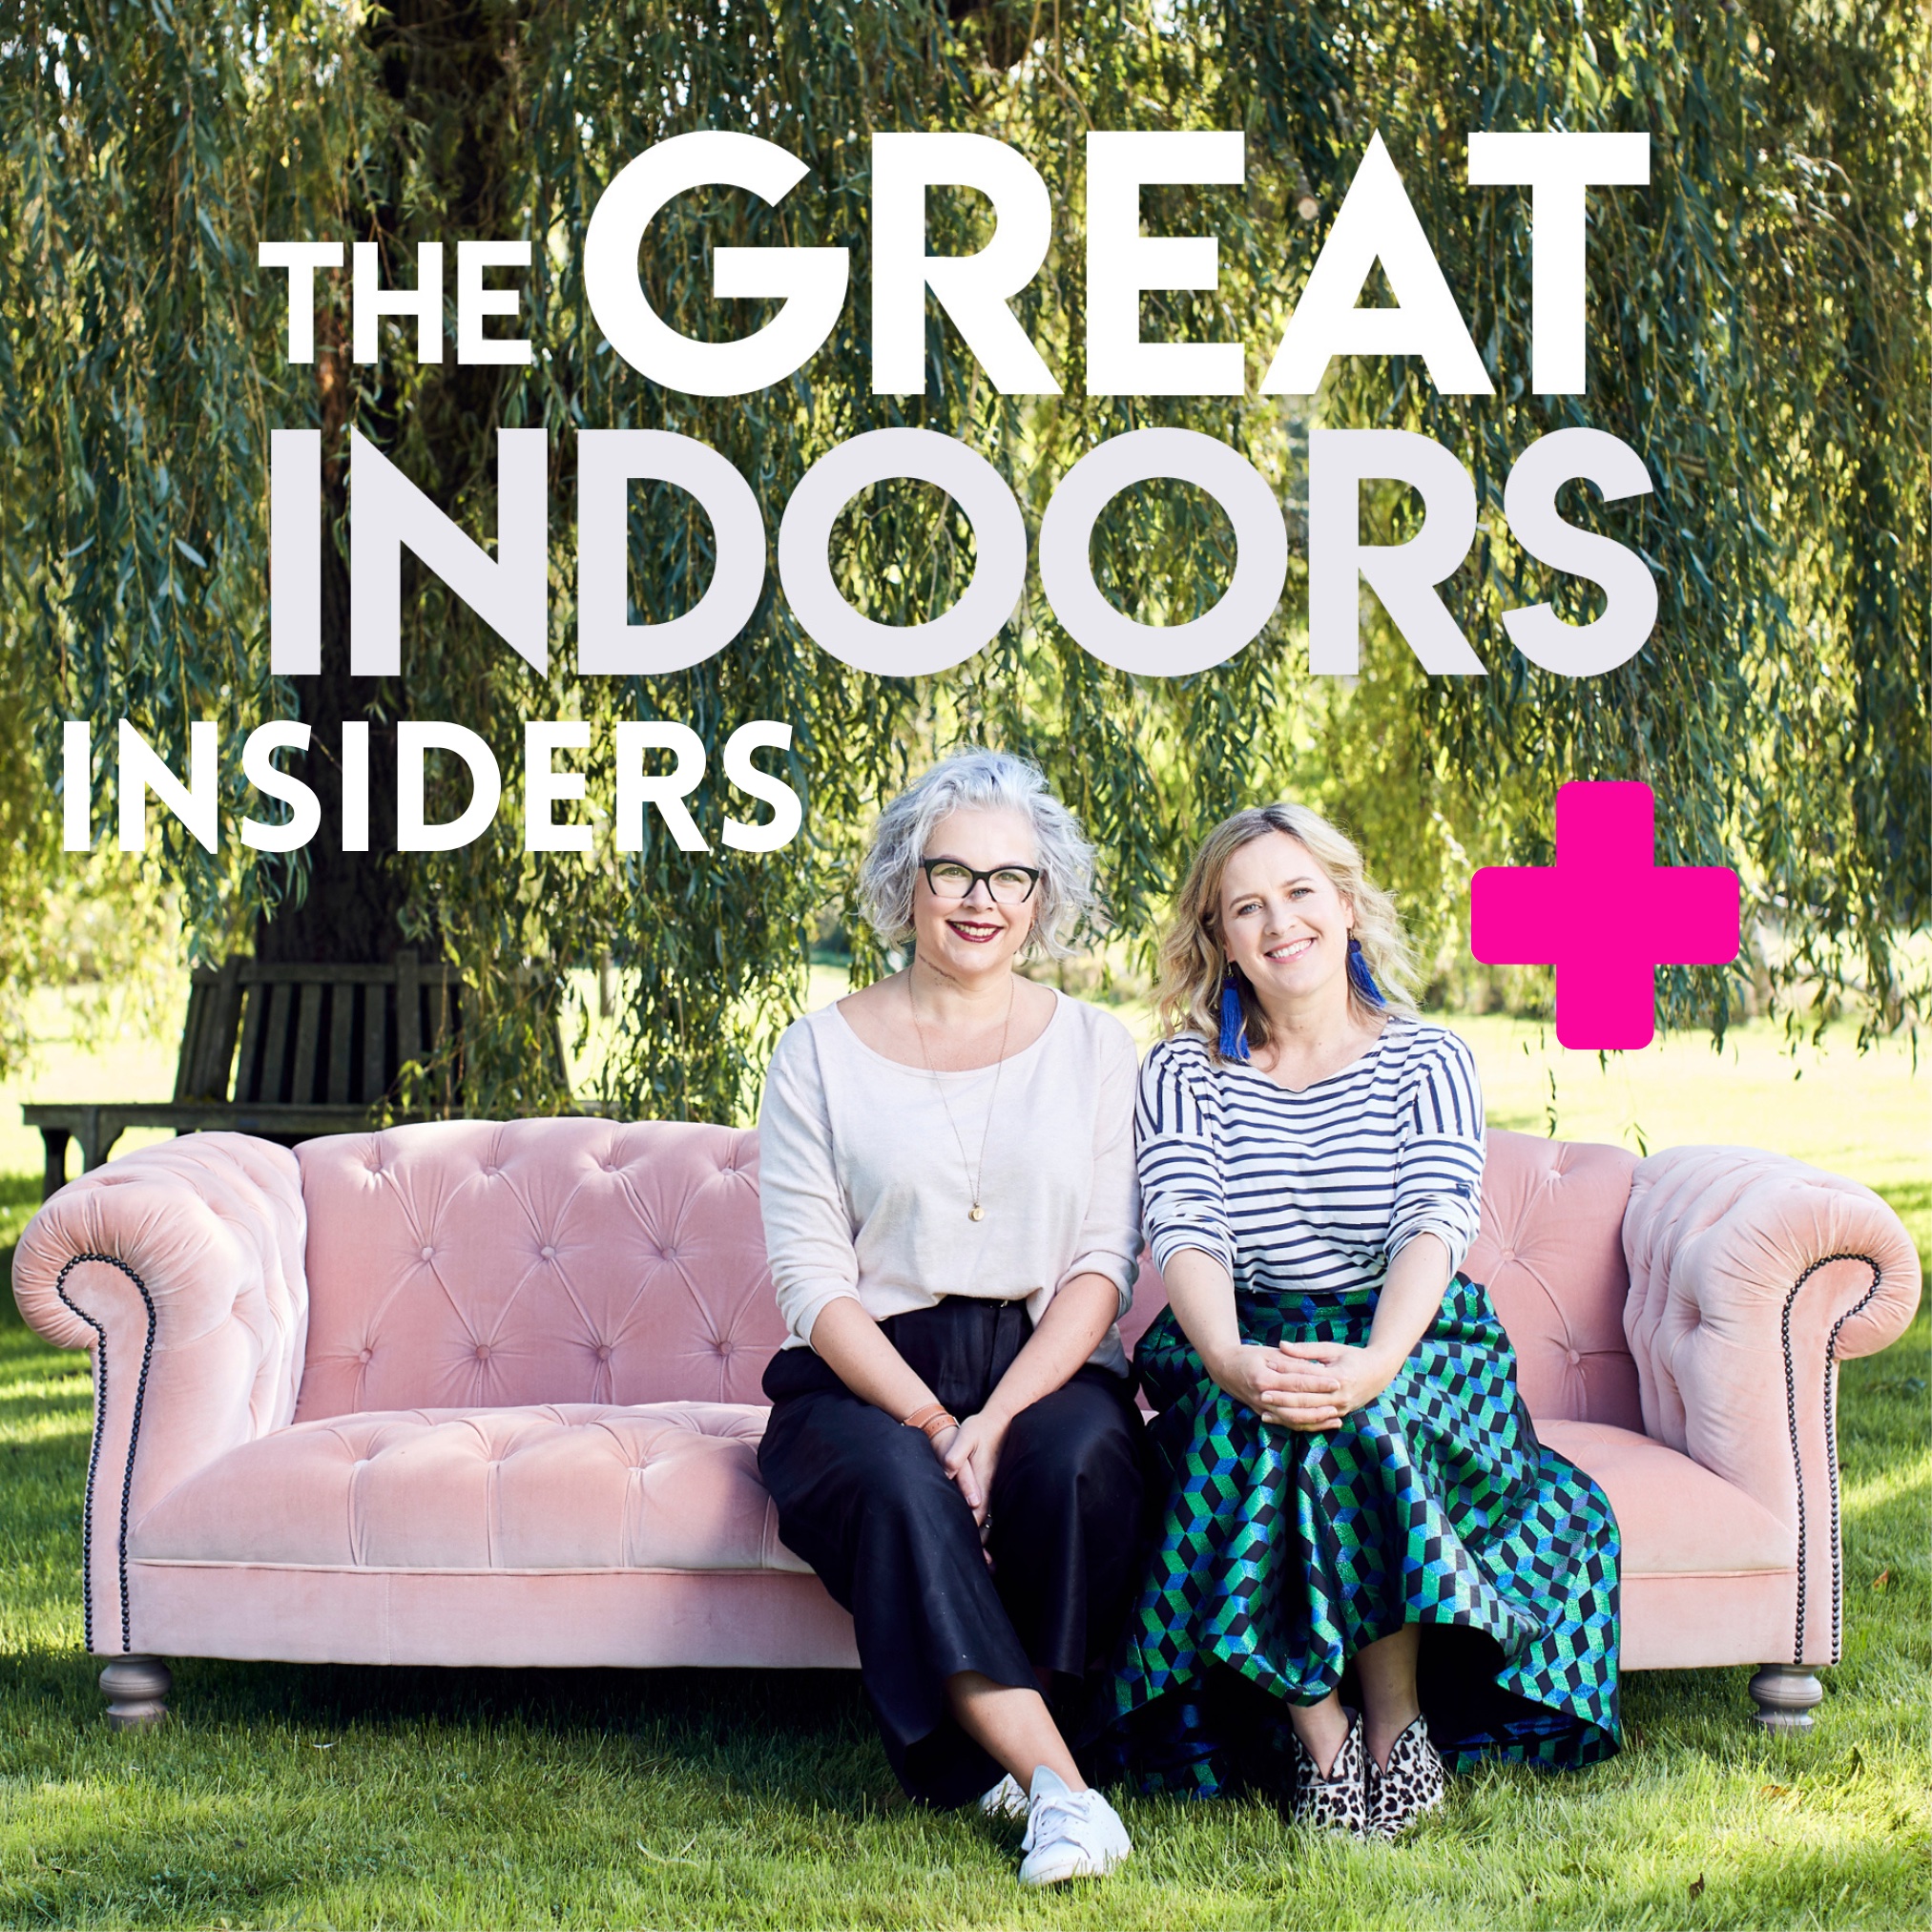 The Great Indoors logo